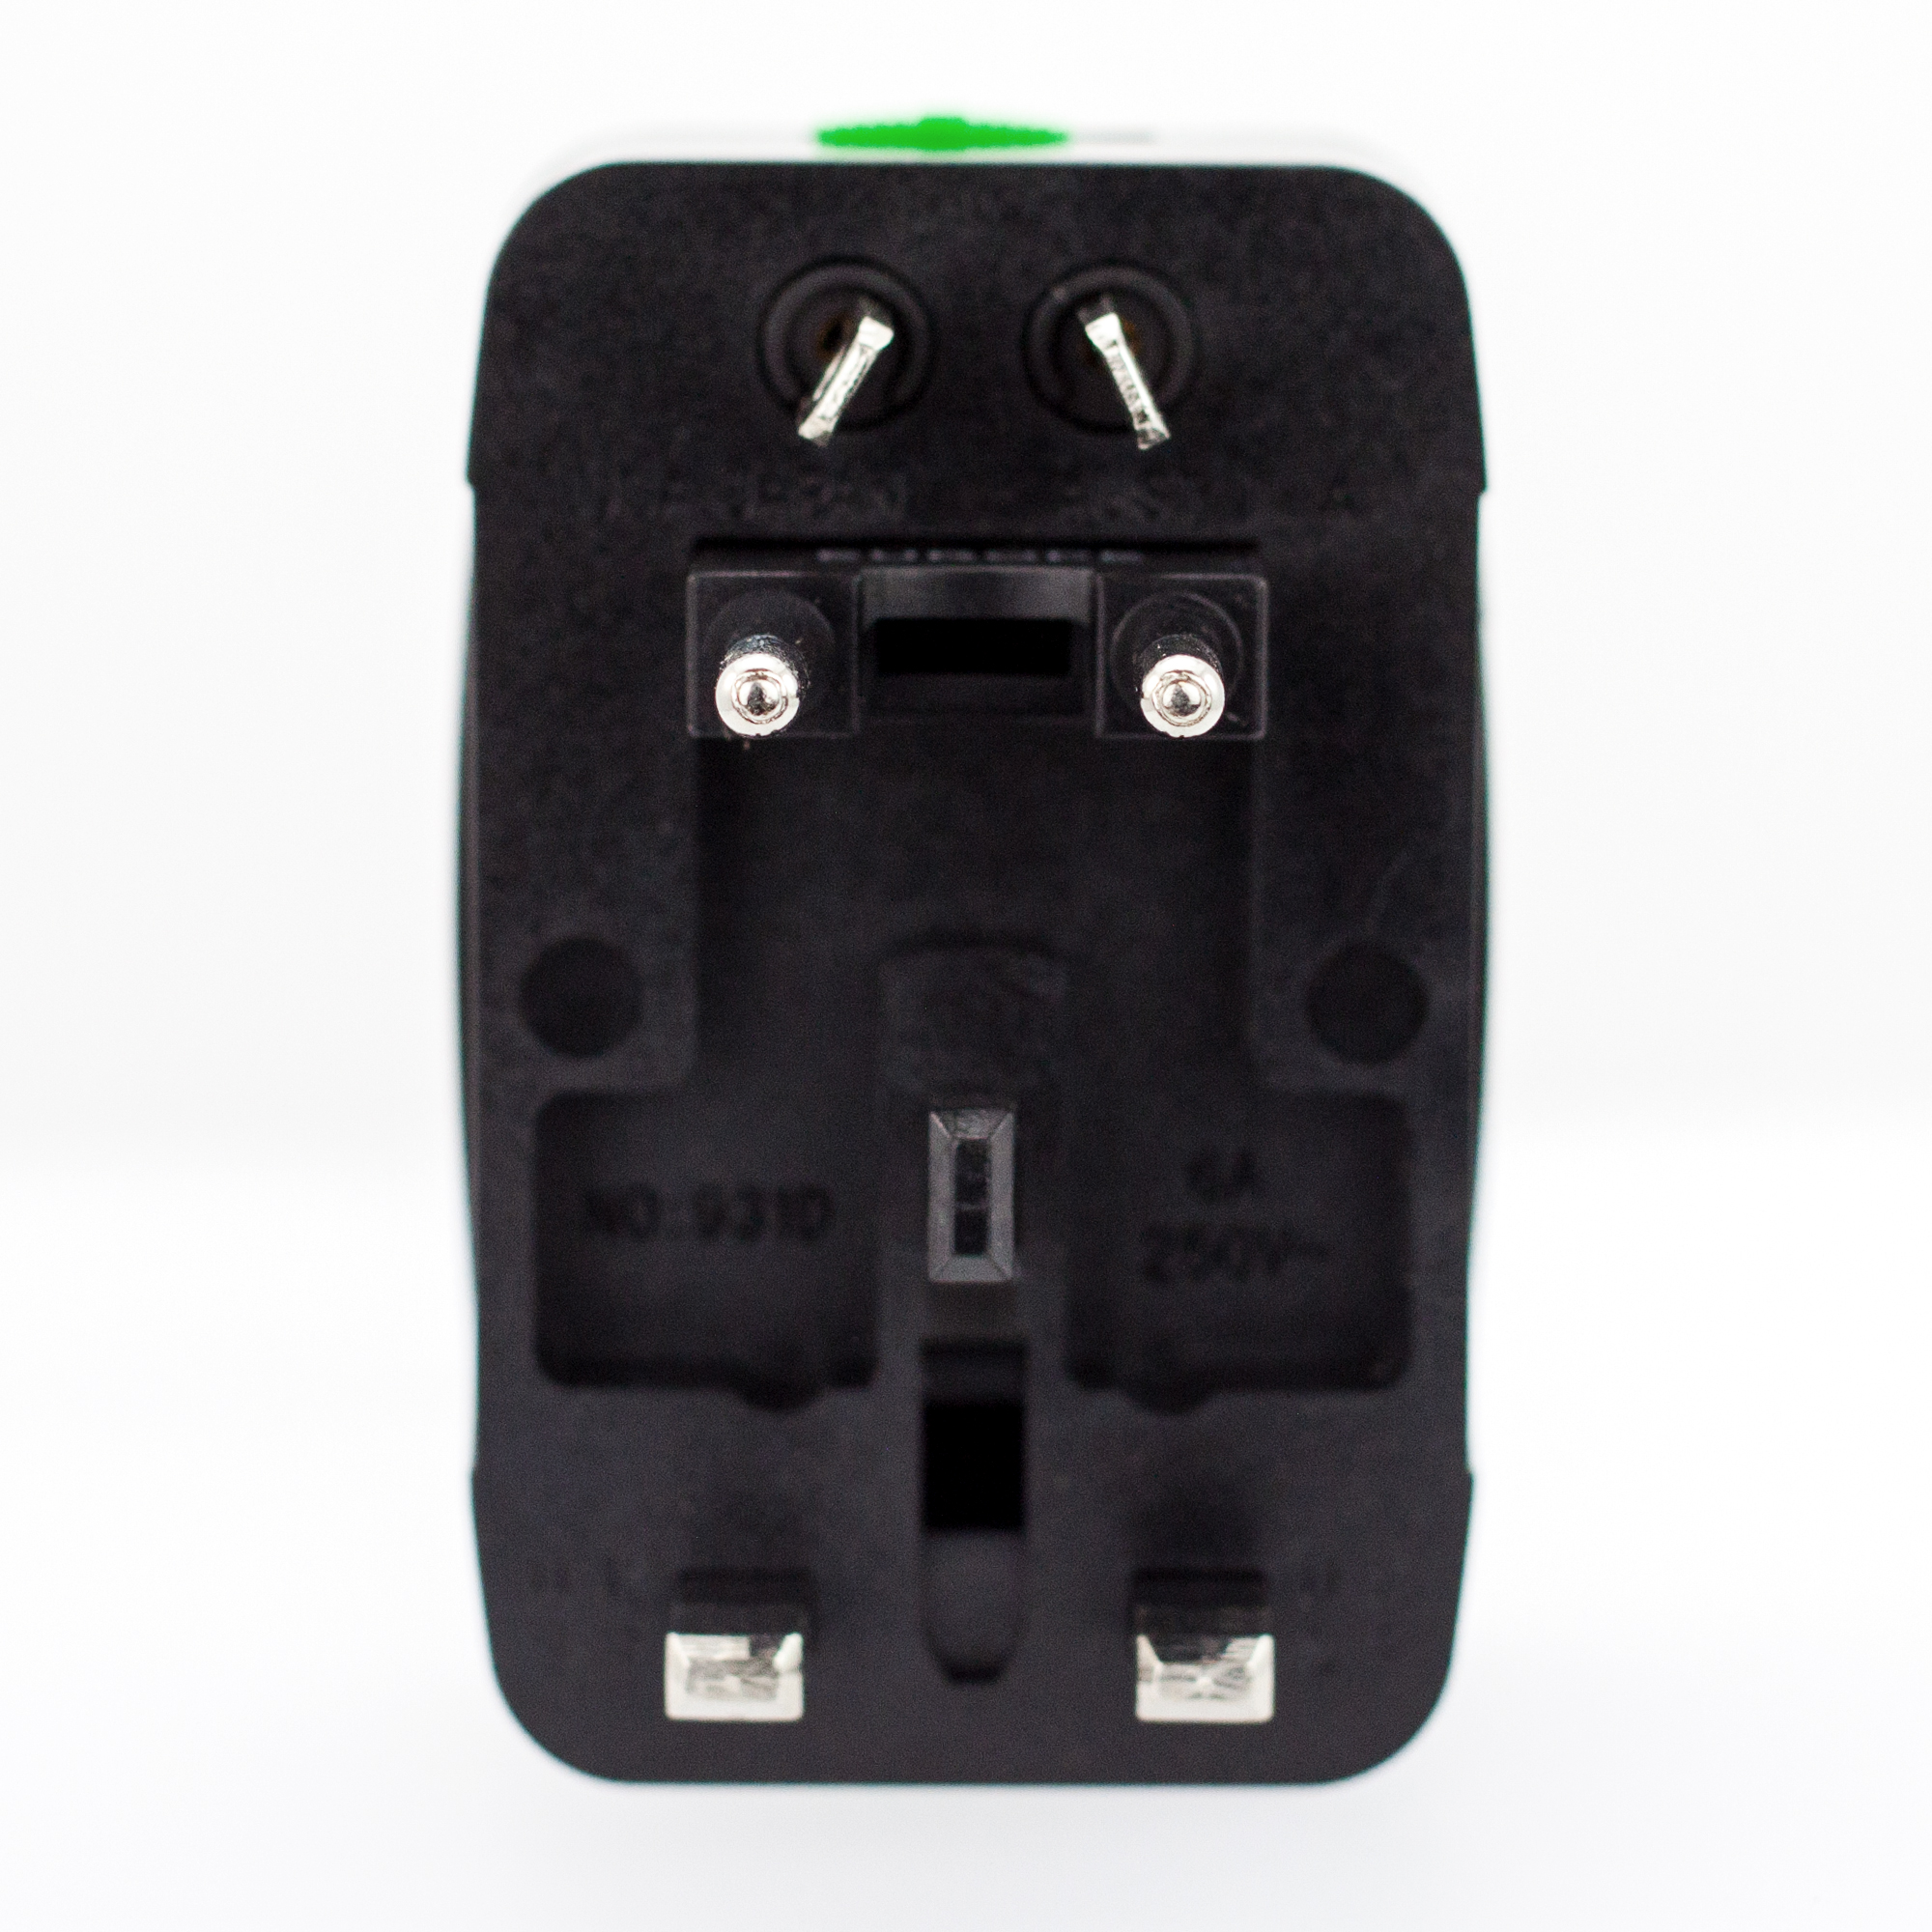 Miami CarryOn Plastic International Travel Adapter with Two USB Ports in Black - image 3 of 12